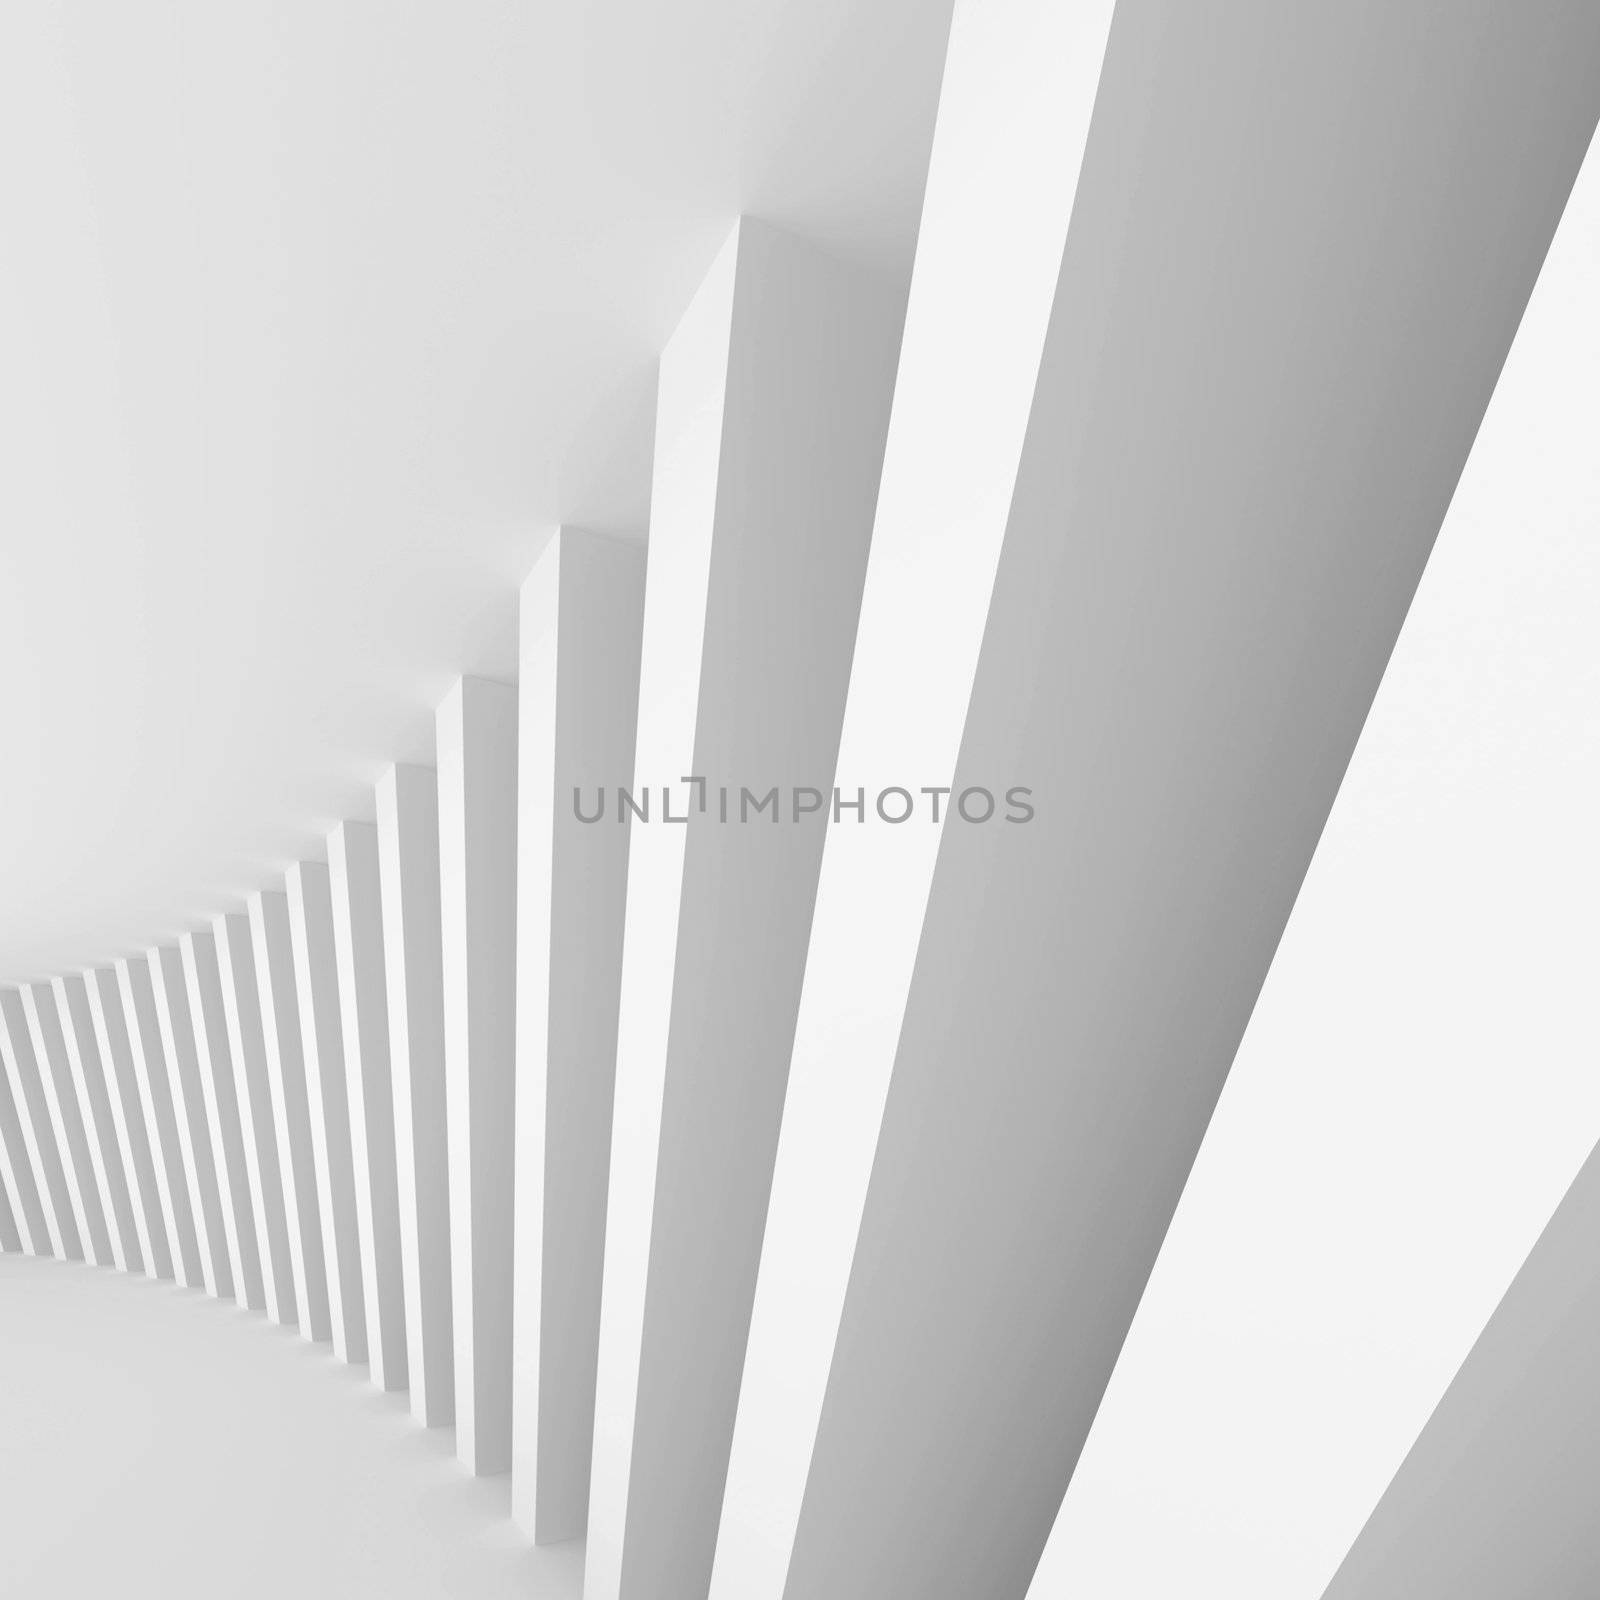 3d Illustration of White Abstract Architecture Wallpaper